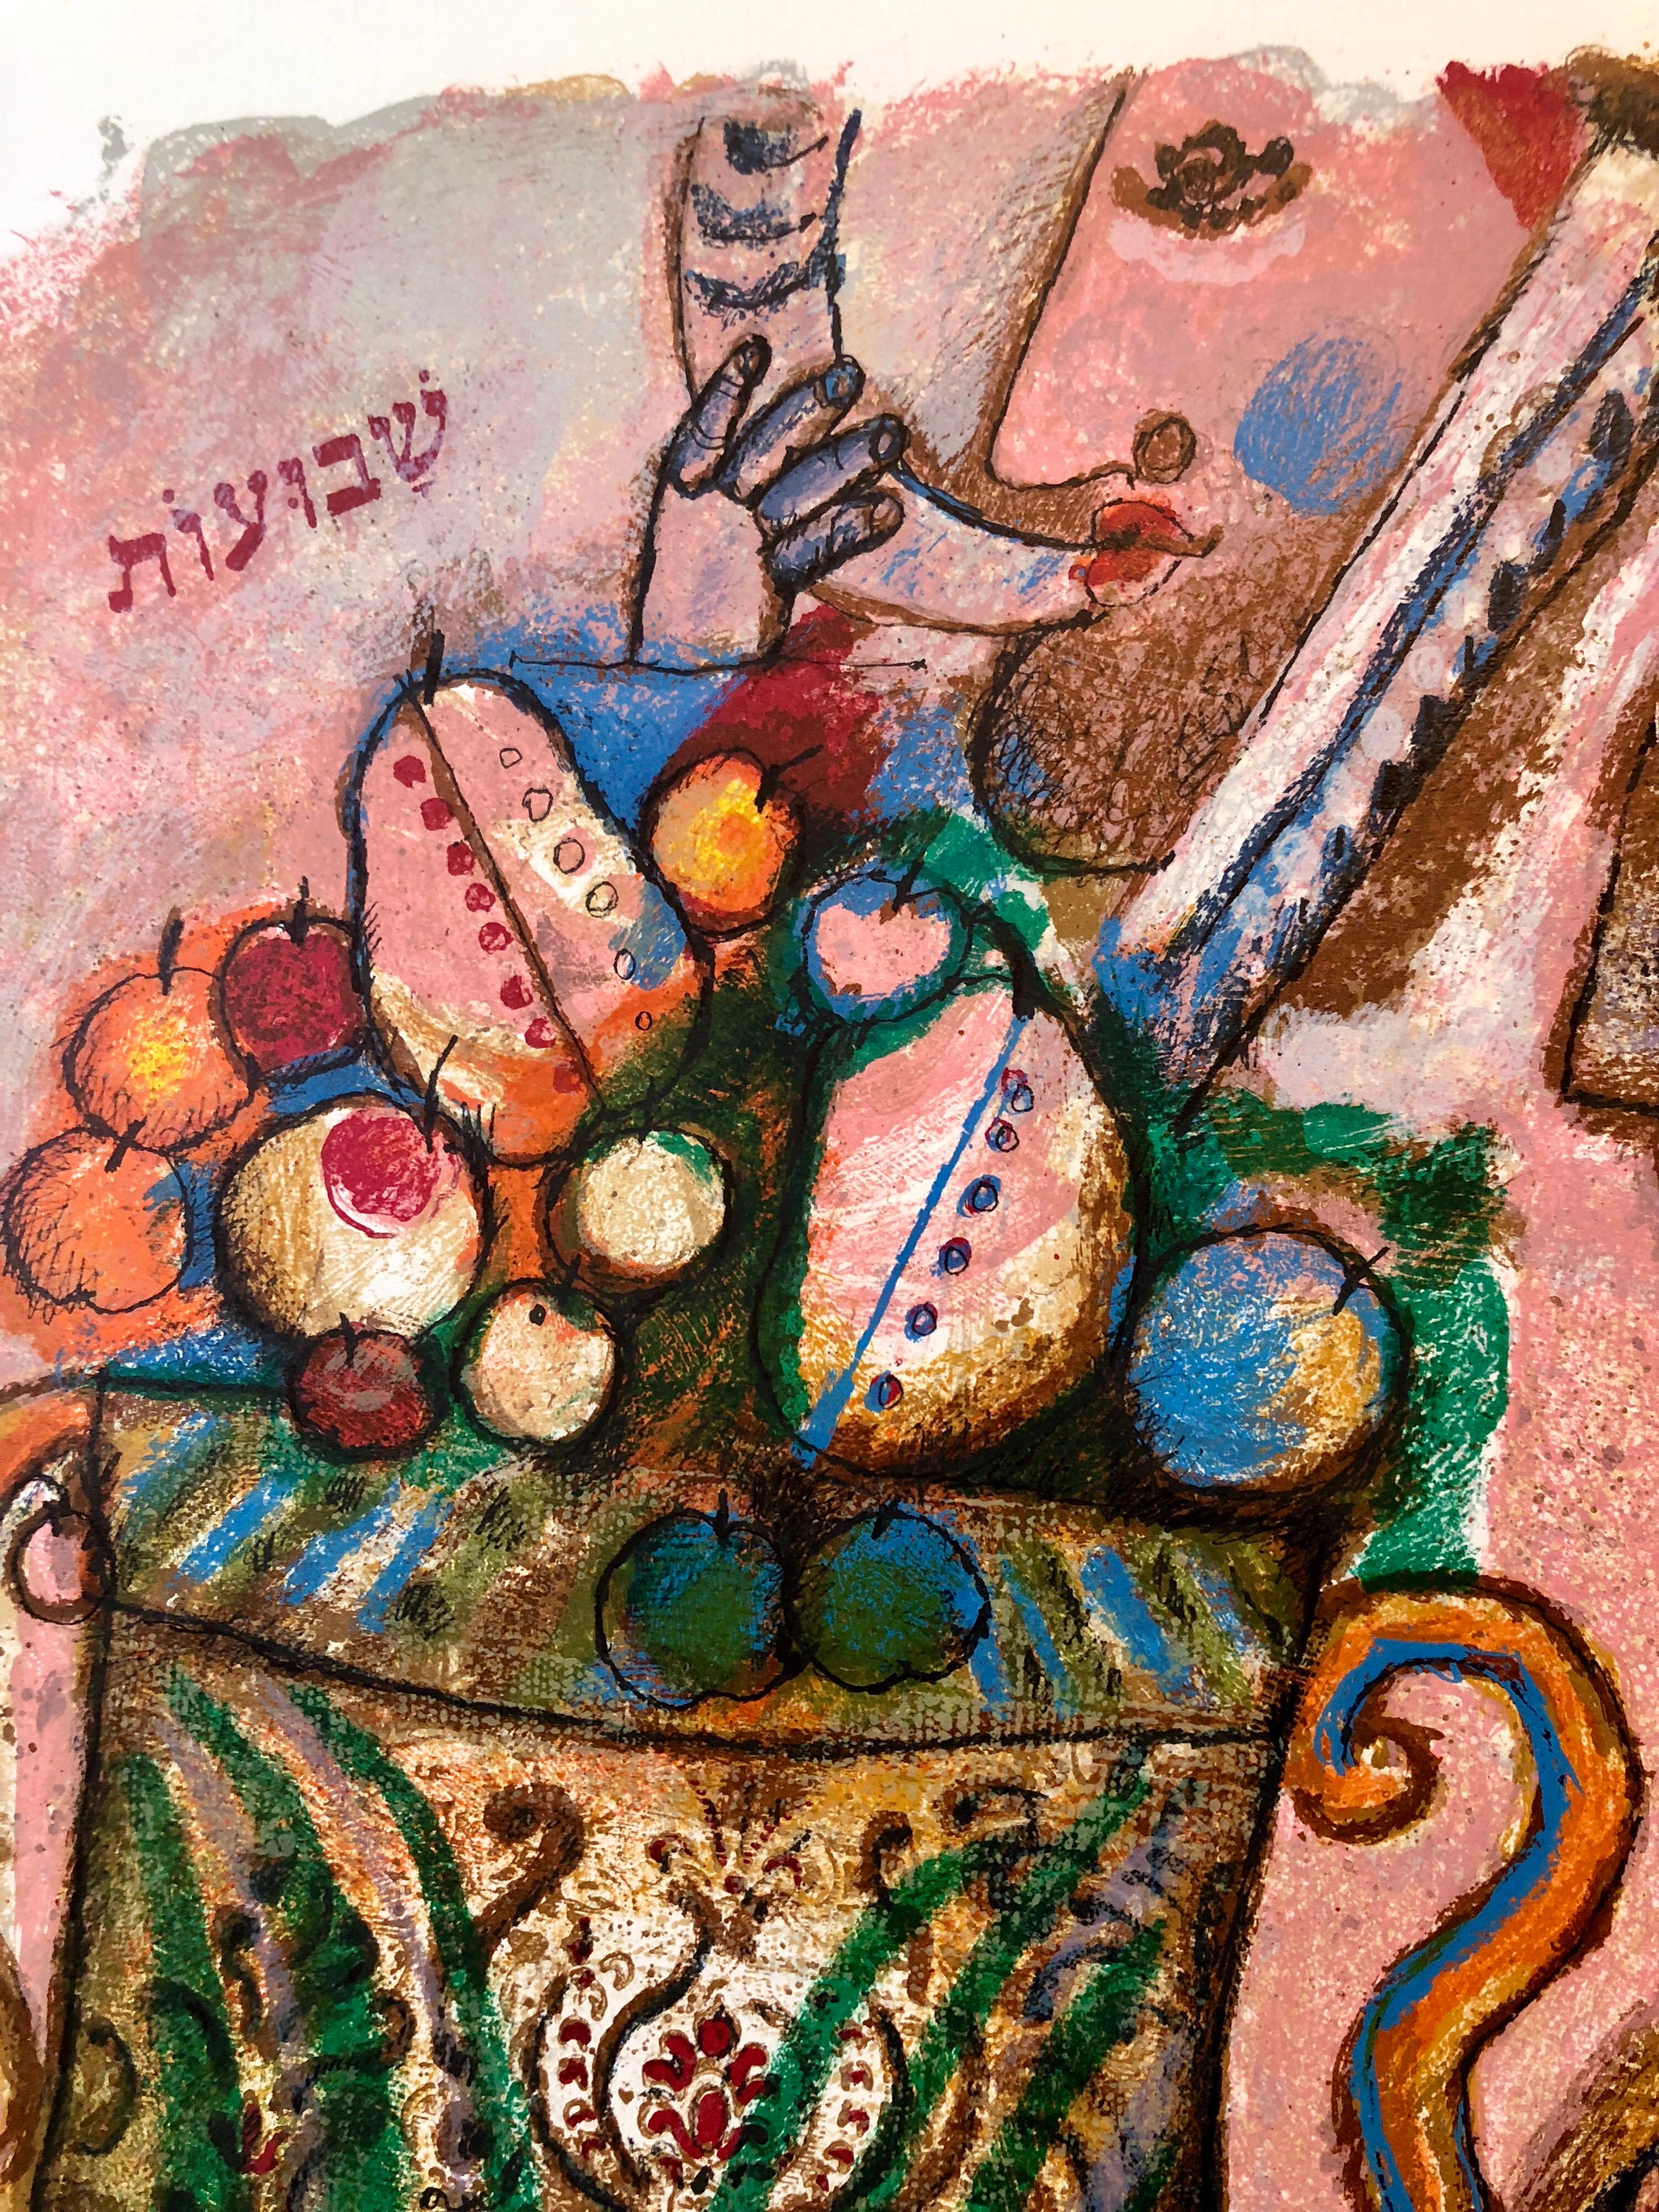 Theo Tobiasse 
Suite: Shavuot Festival 
Year: 1984
Medium: Original carborundum embossed etching lithograph in colors on Arches paper (deckle edged paper)
Signature: Hand signed by the artist 
Publisher Nahan Gallery, New Orleans
Theo Tobiasse, born